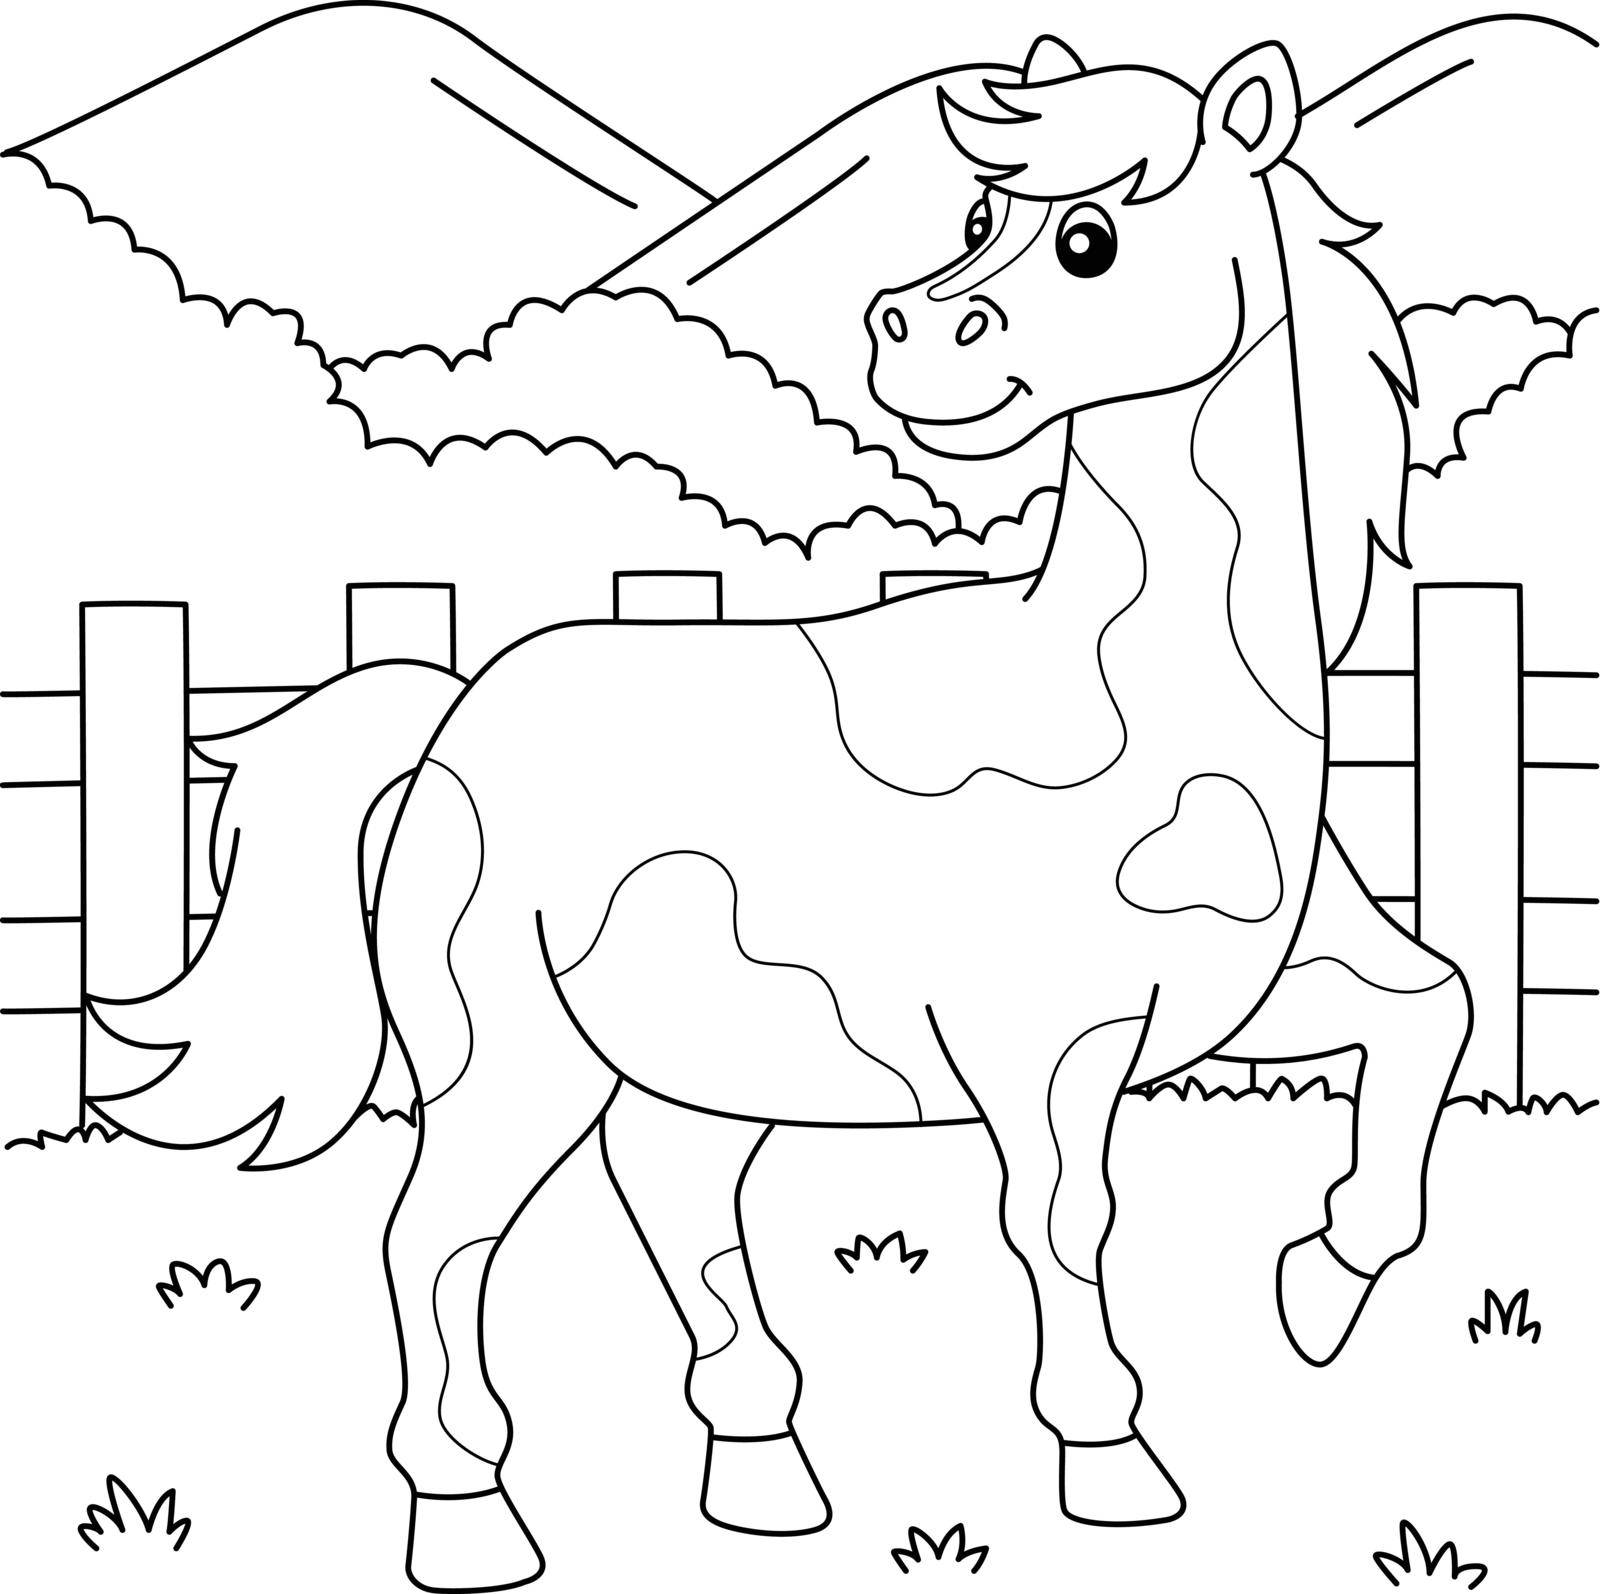 Horse Coloring Page for Kids by abbydesign